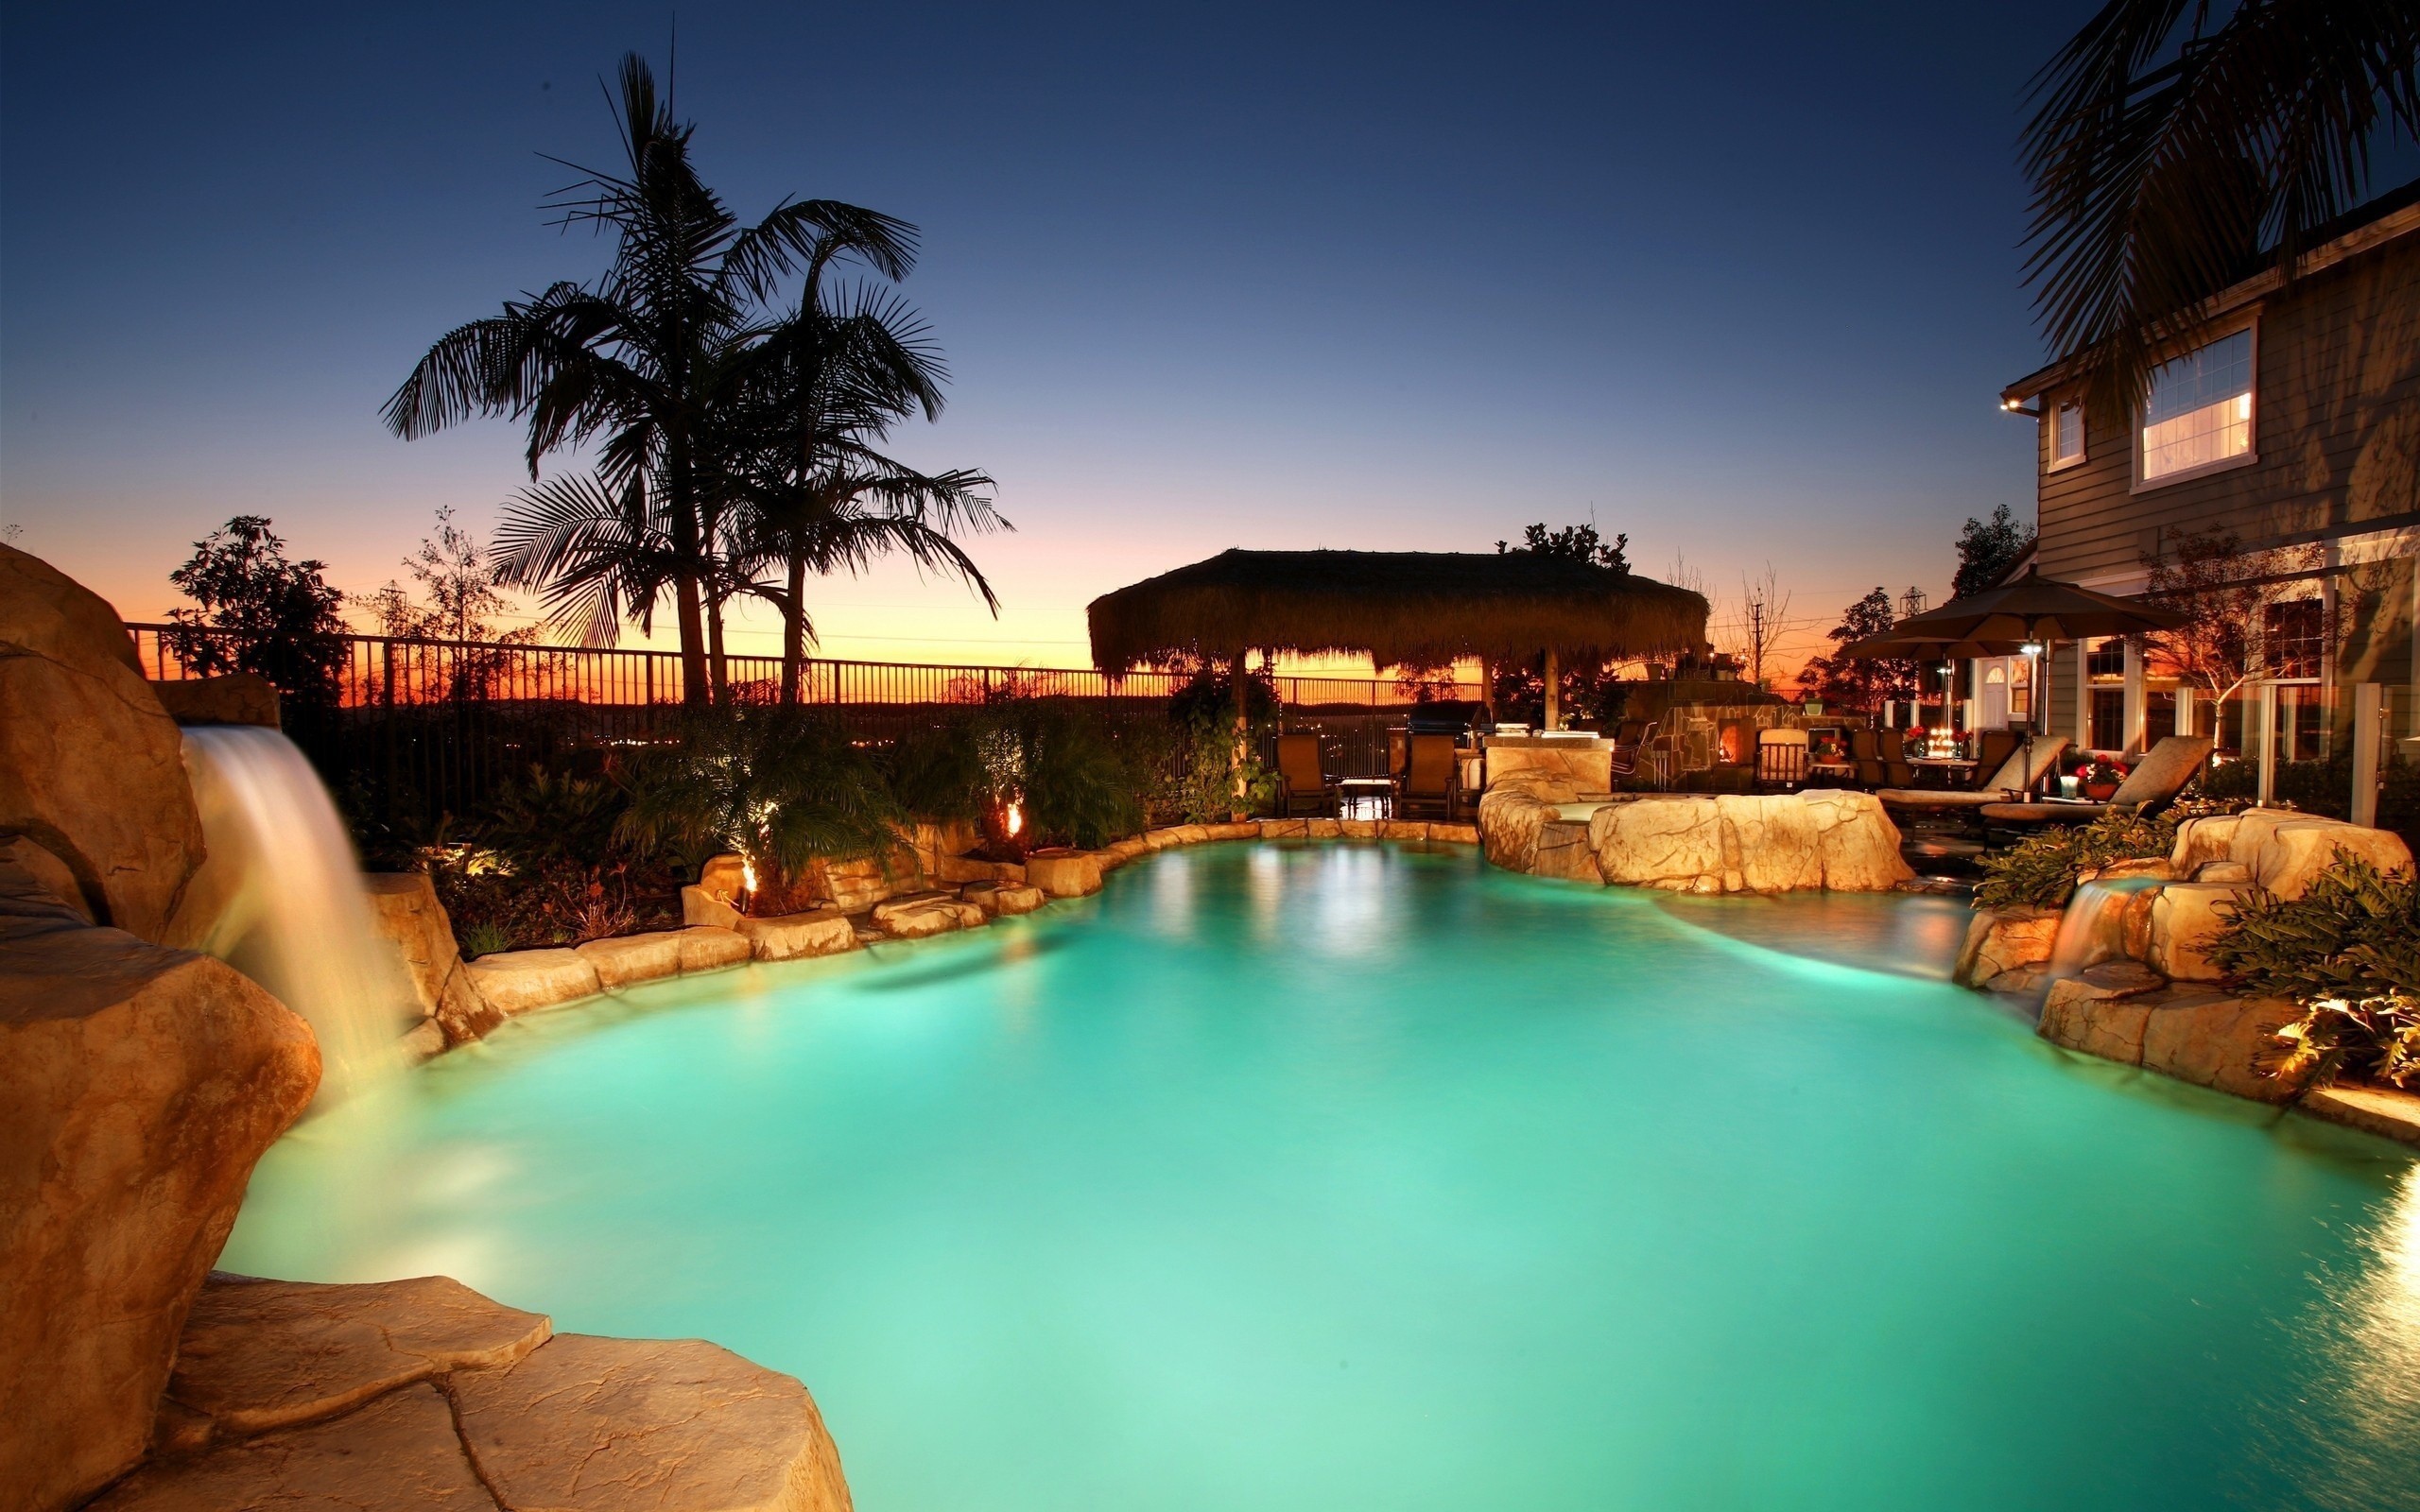 Swimming Pool Mansions Palm Trees House Backyard Dusk 2560x1600